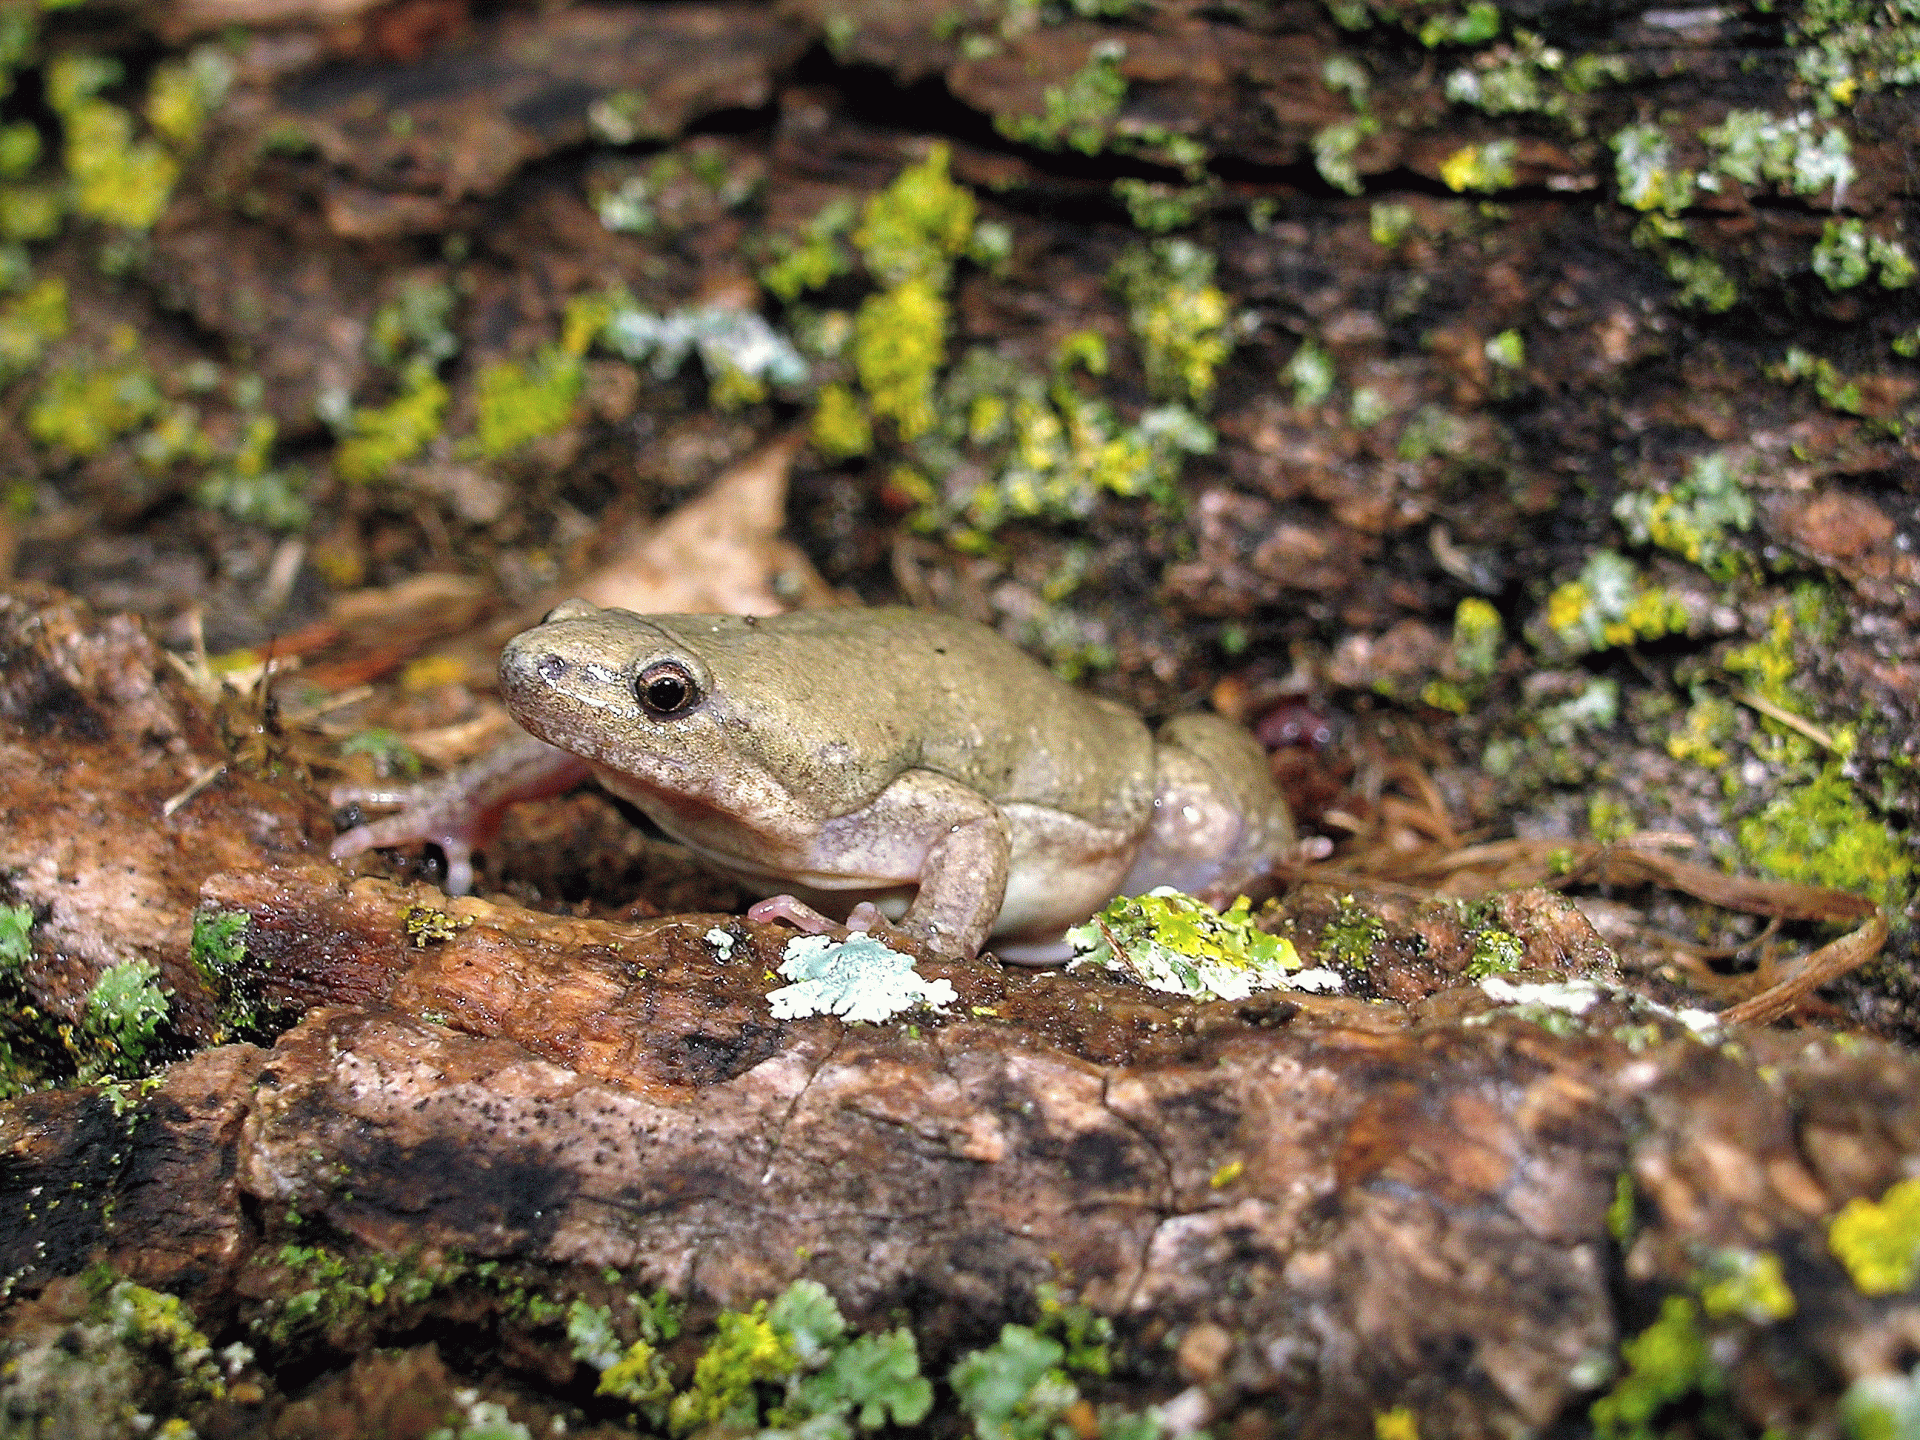 Western Narrow-mouthed Toad (Formerly Great Plains Narrowmouth Toad